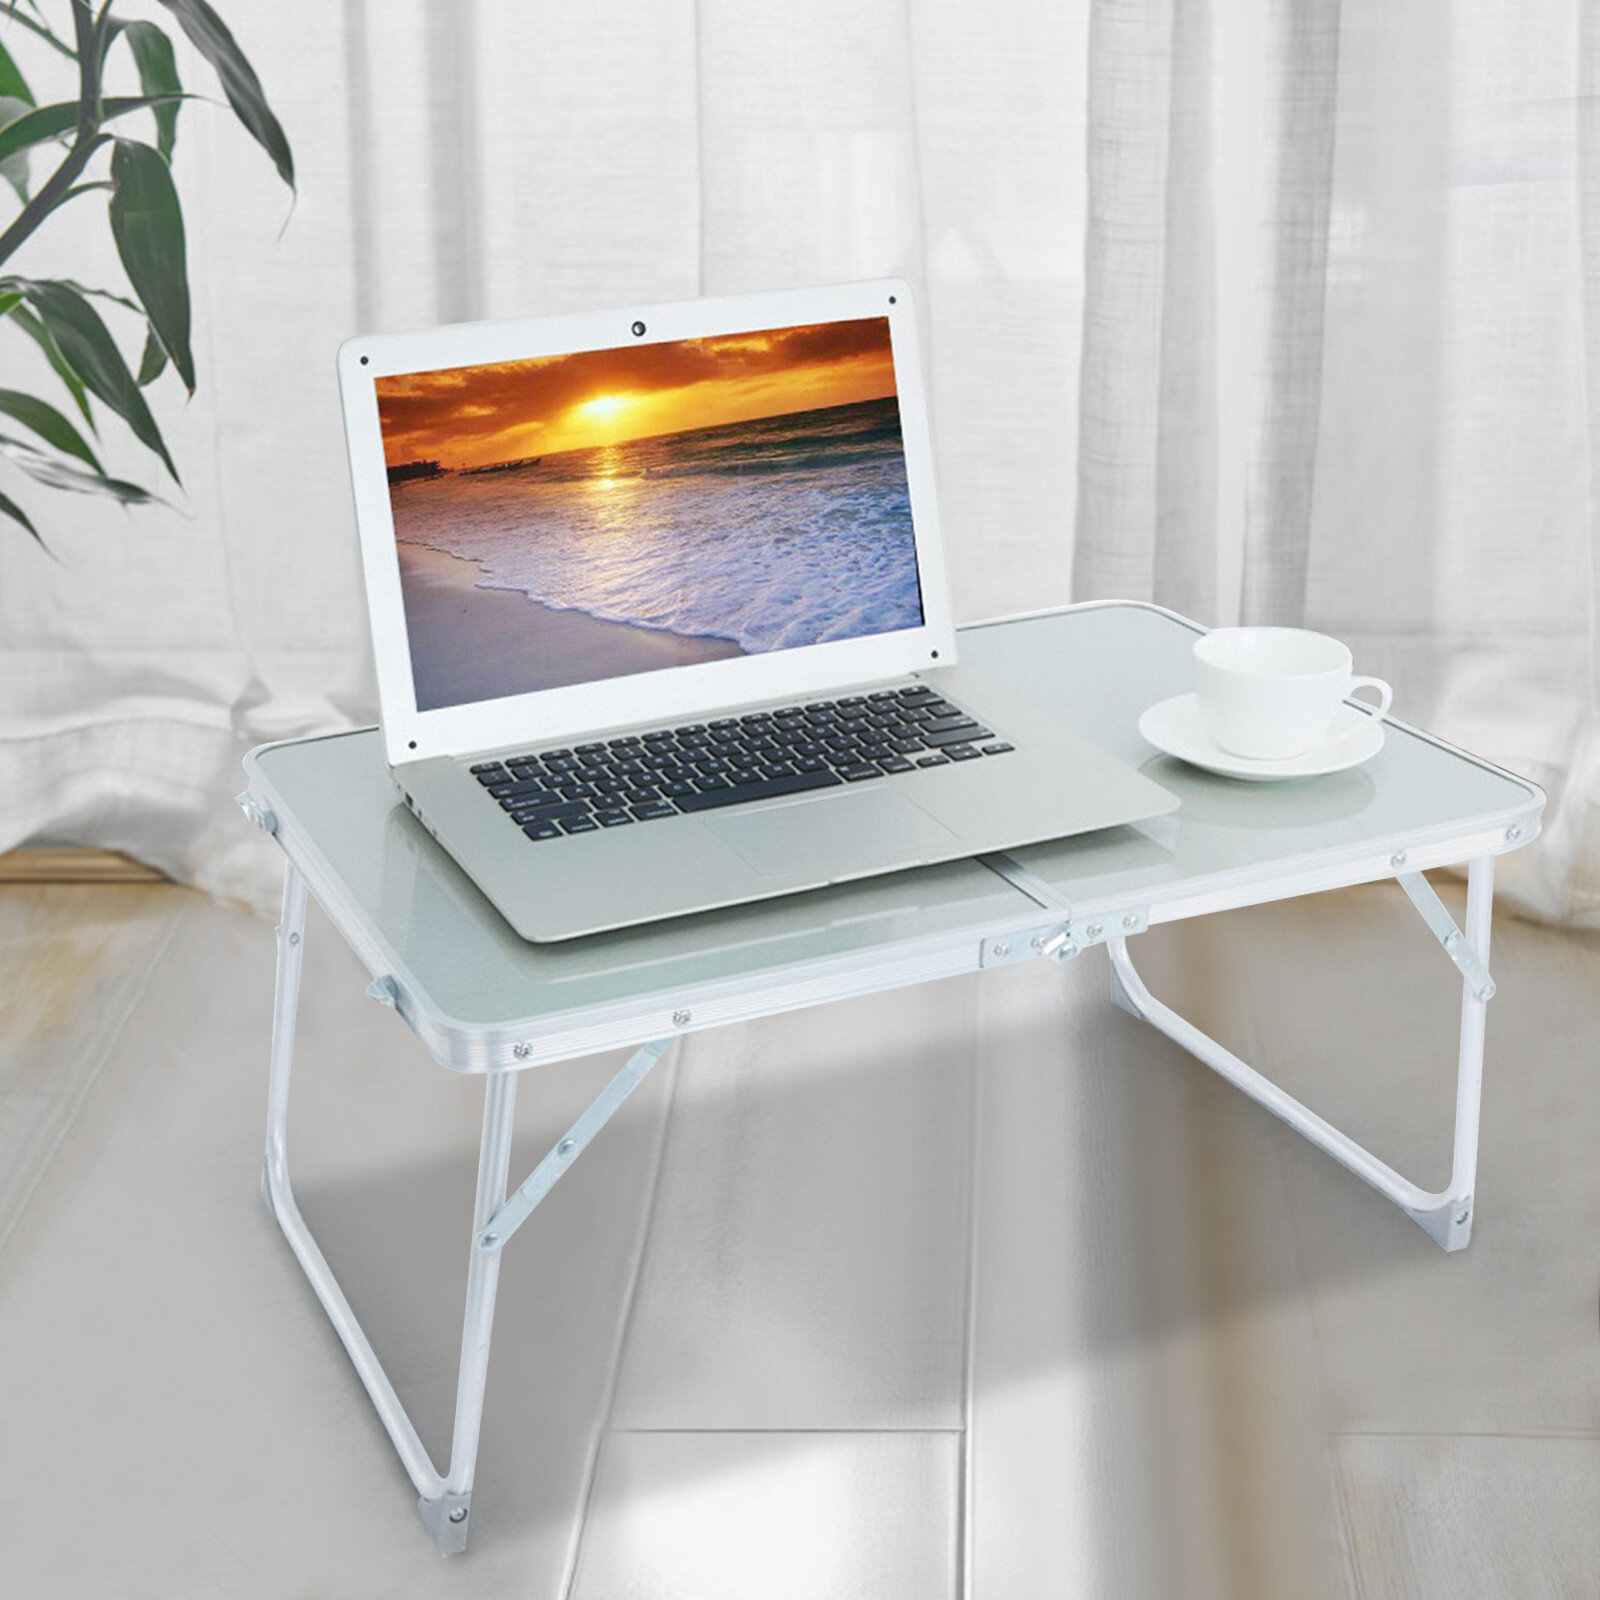 USA Large Bed Tray Foldable Portable Multifunction Laptop Desk Lazy Laptop Table 